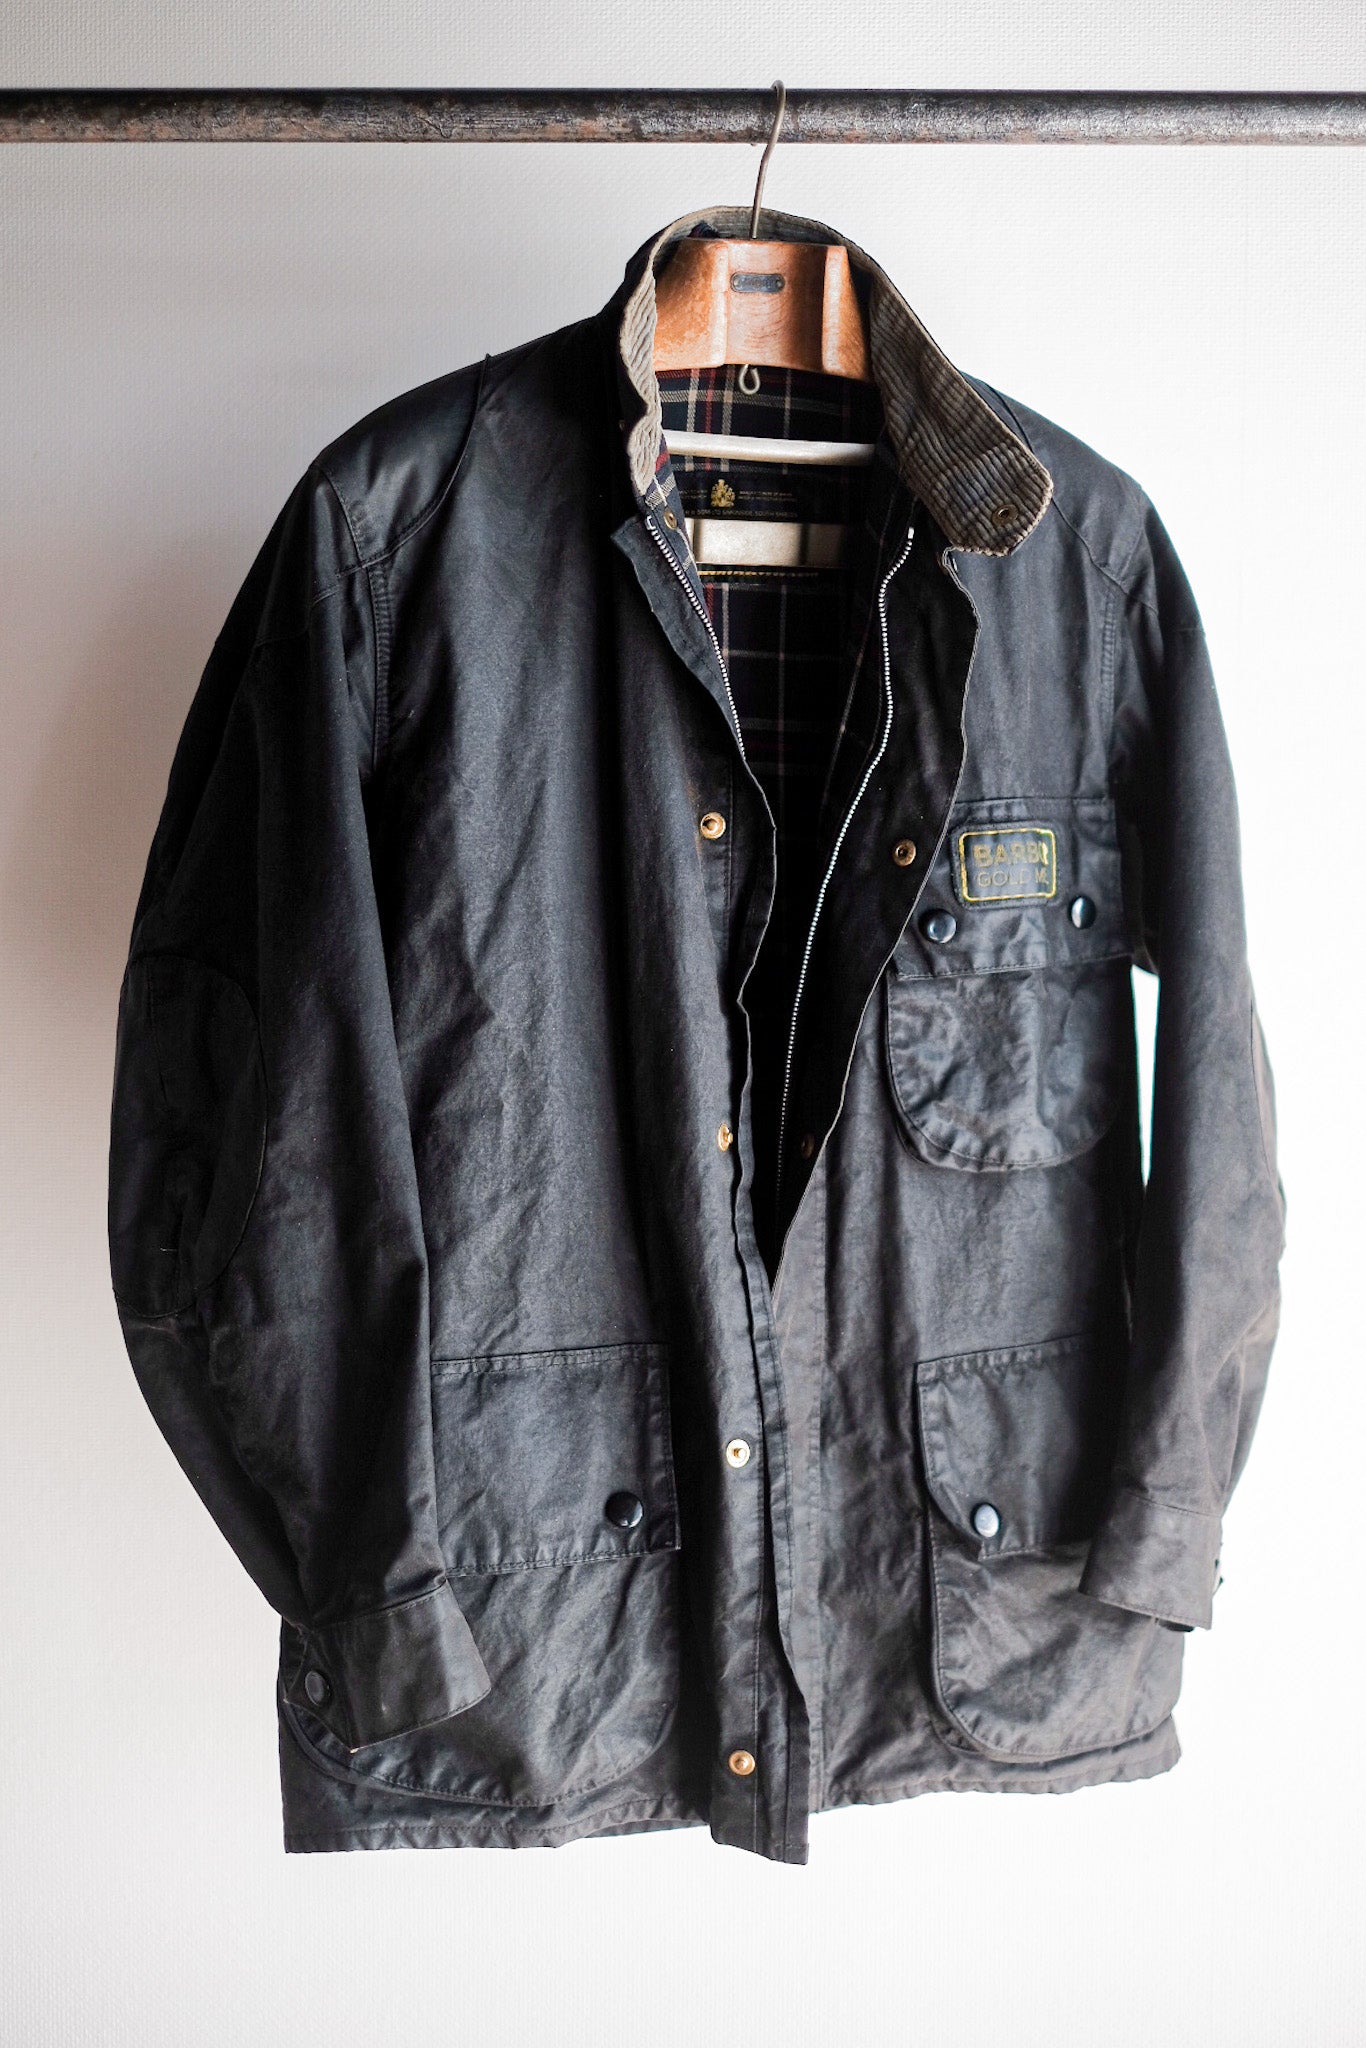 【~70's】Vintage Barbour Waxed Jacket "Unknown Model" 1 Crest